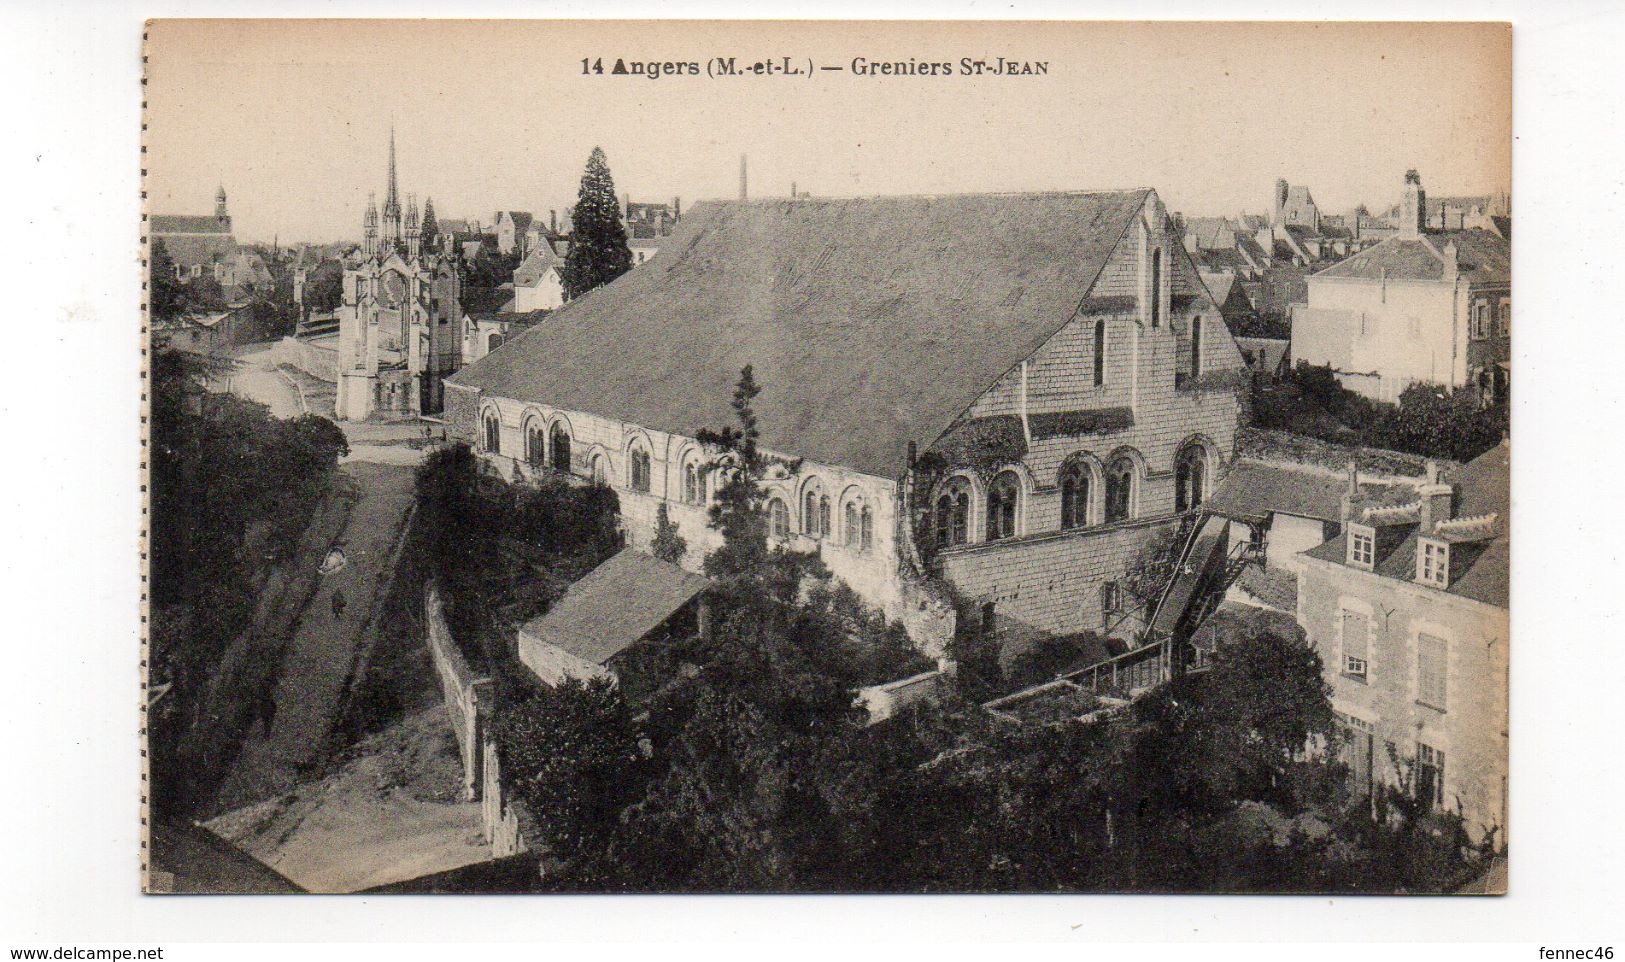 49 - ANGERS - Grenier St Jean (M115) - Angers